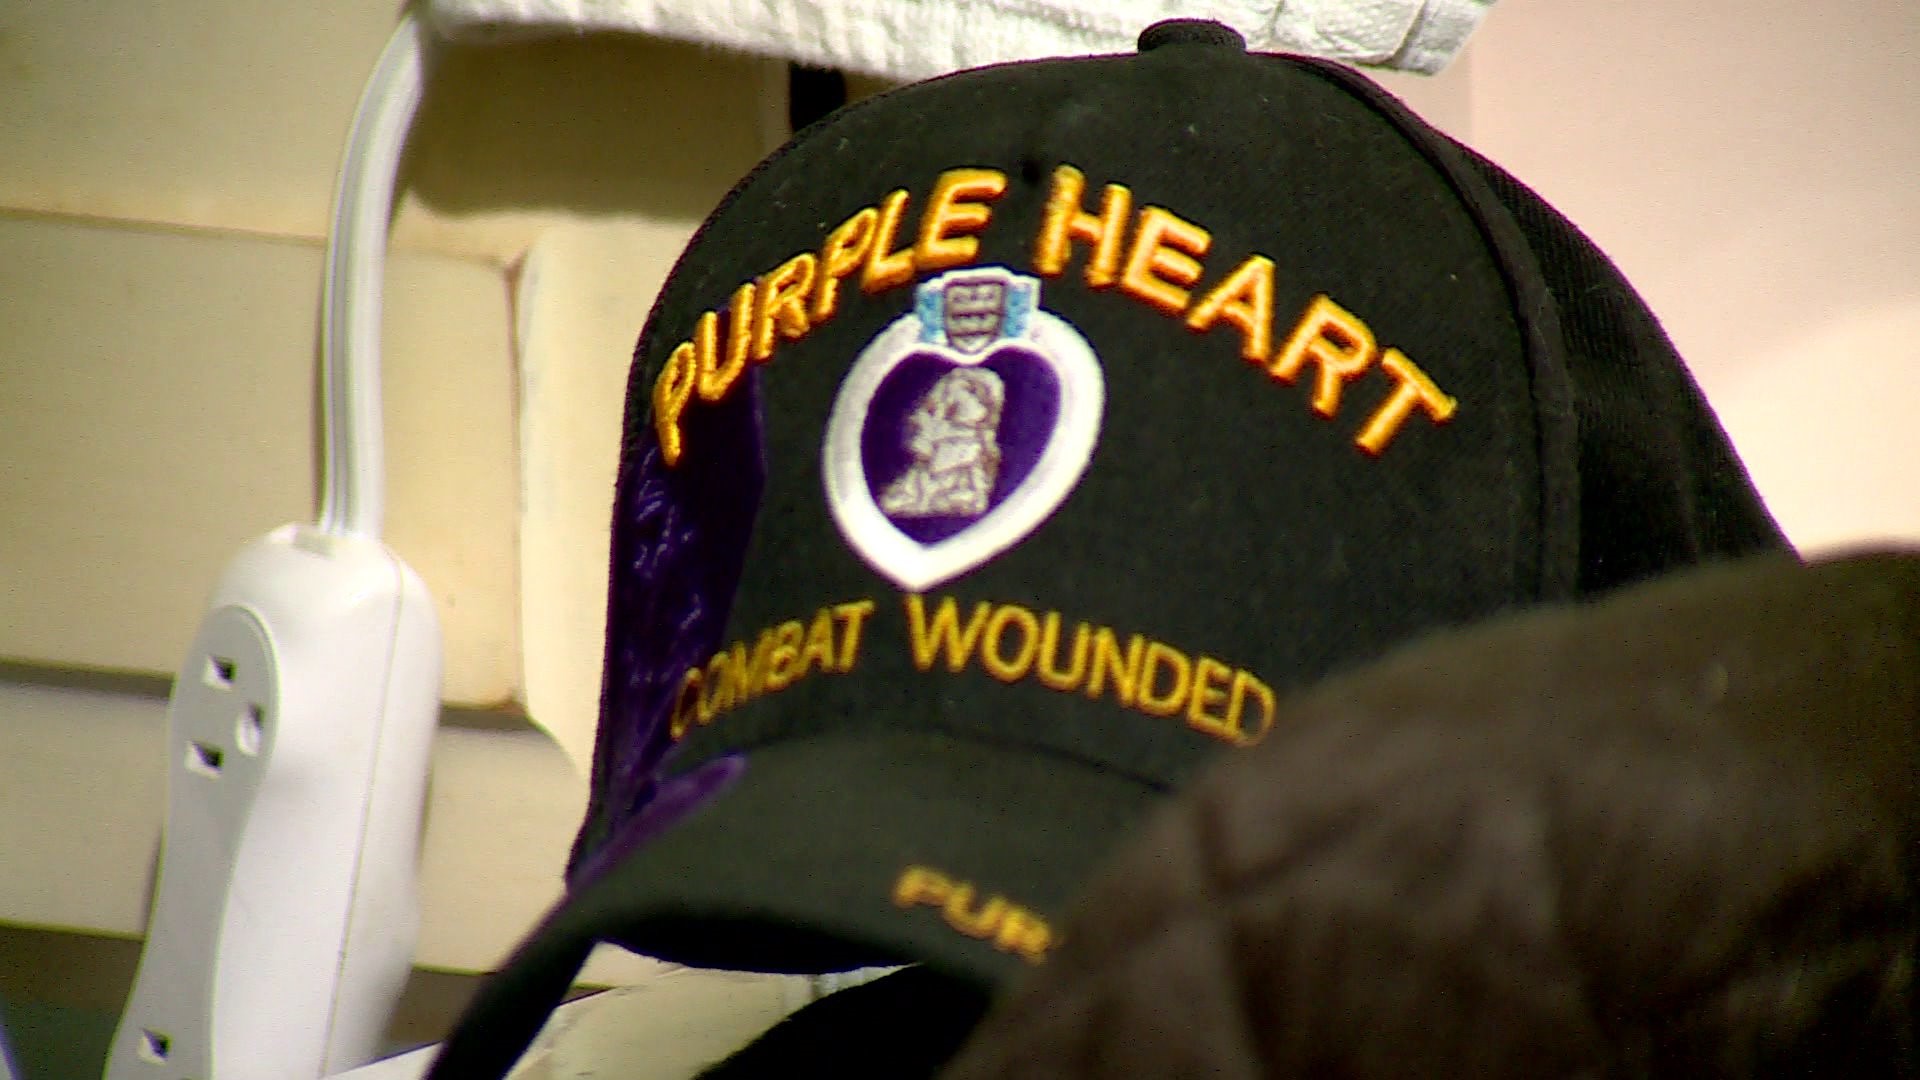 Local Purple Heart Recipient Honored Nationally